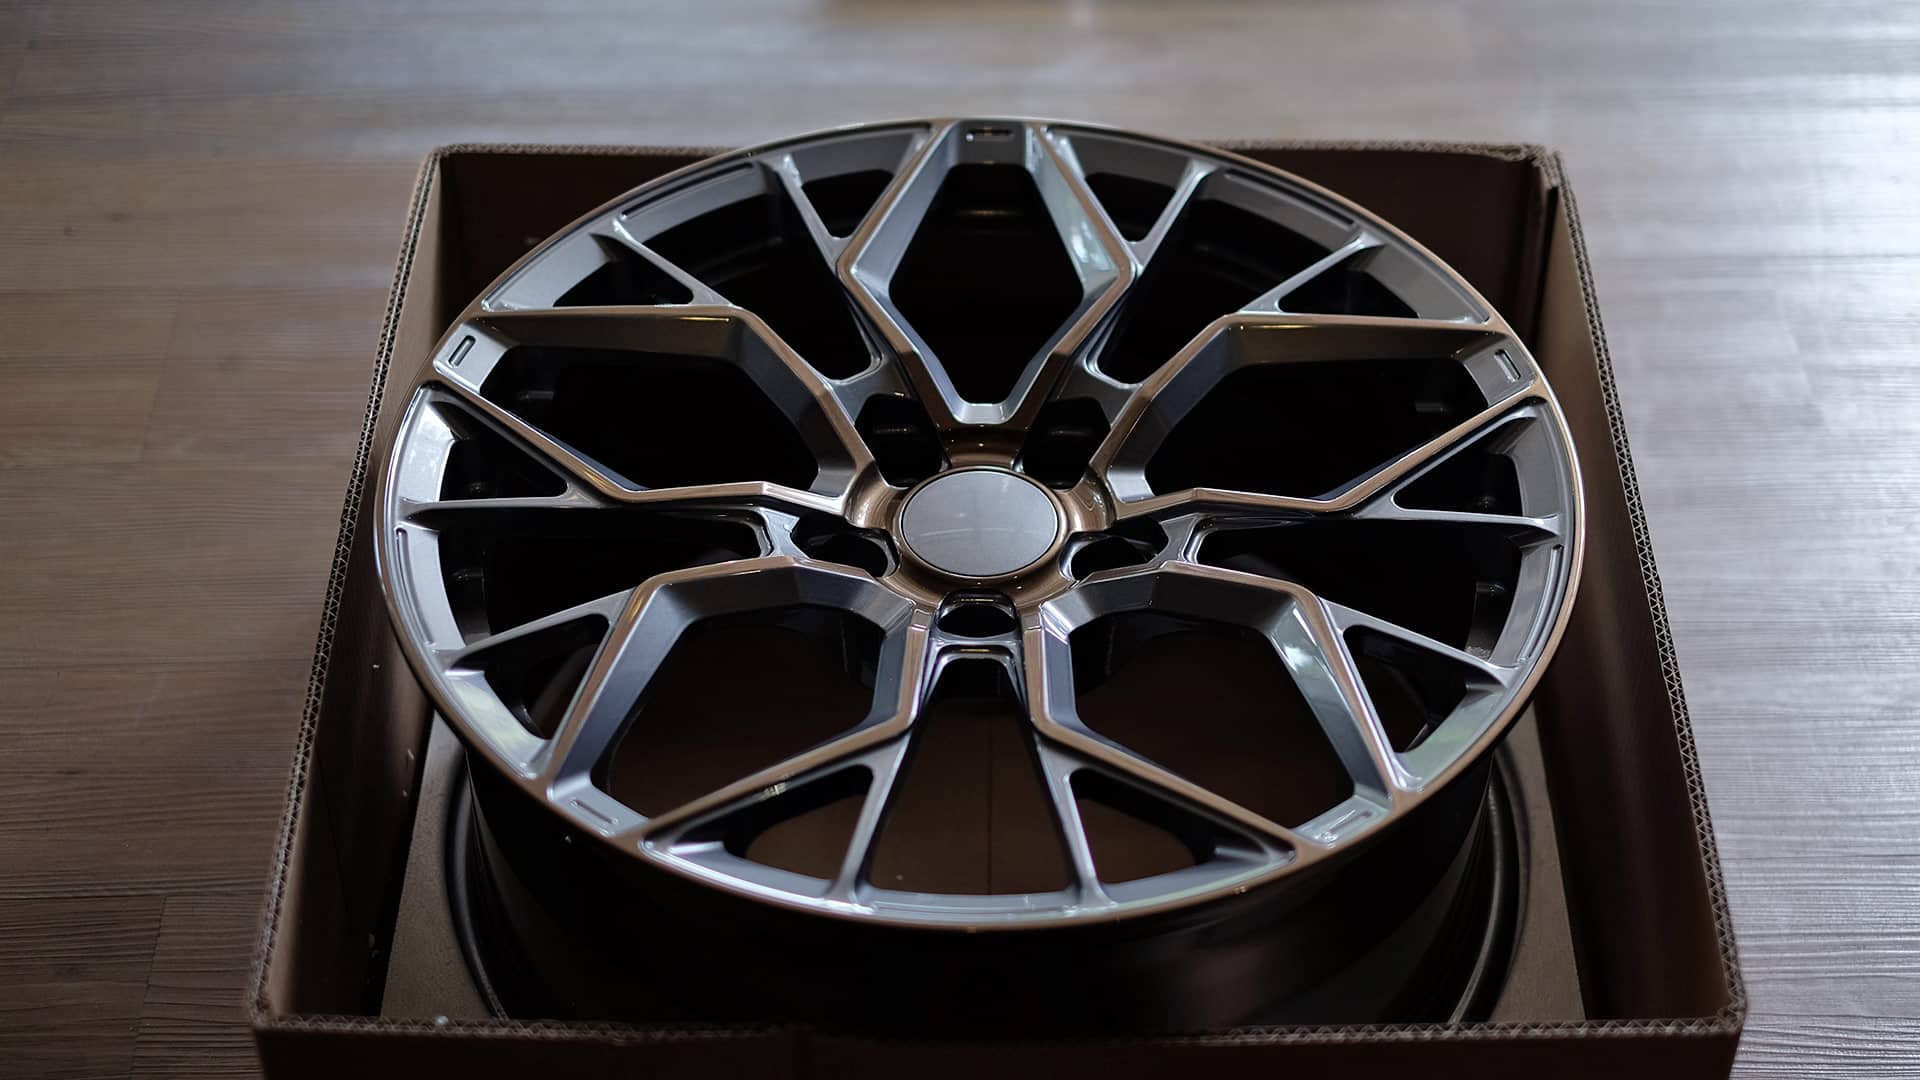 18 inch Custom Forged Wheel in satin gunmetal and bronze face finish